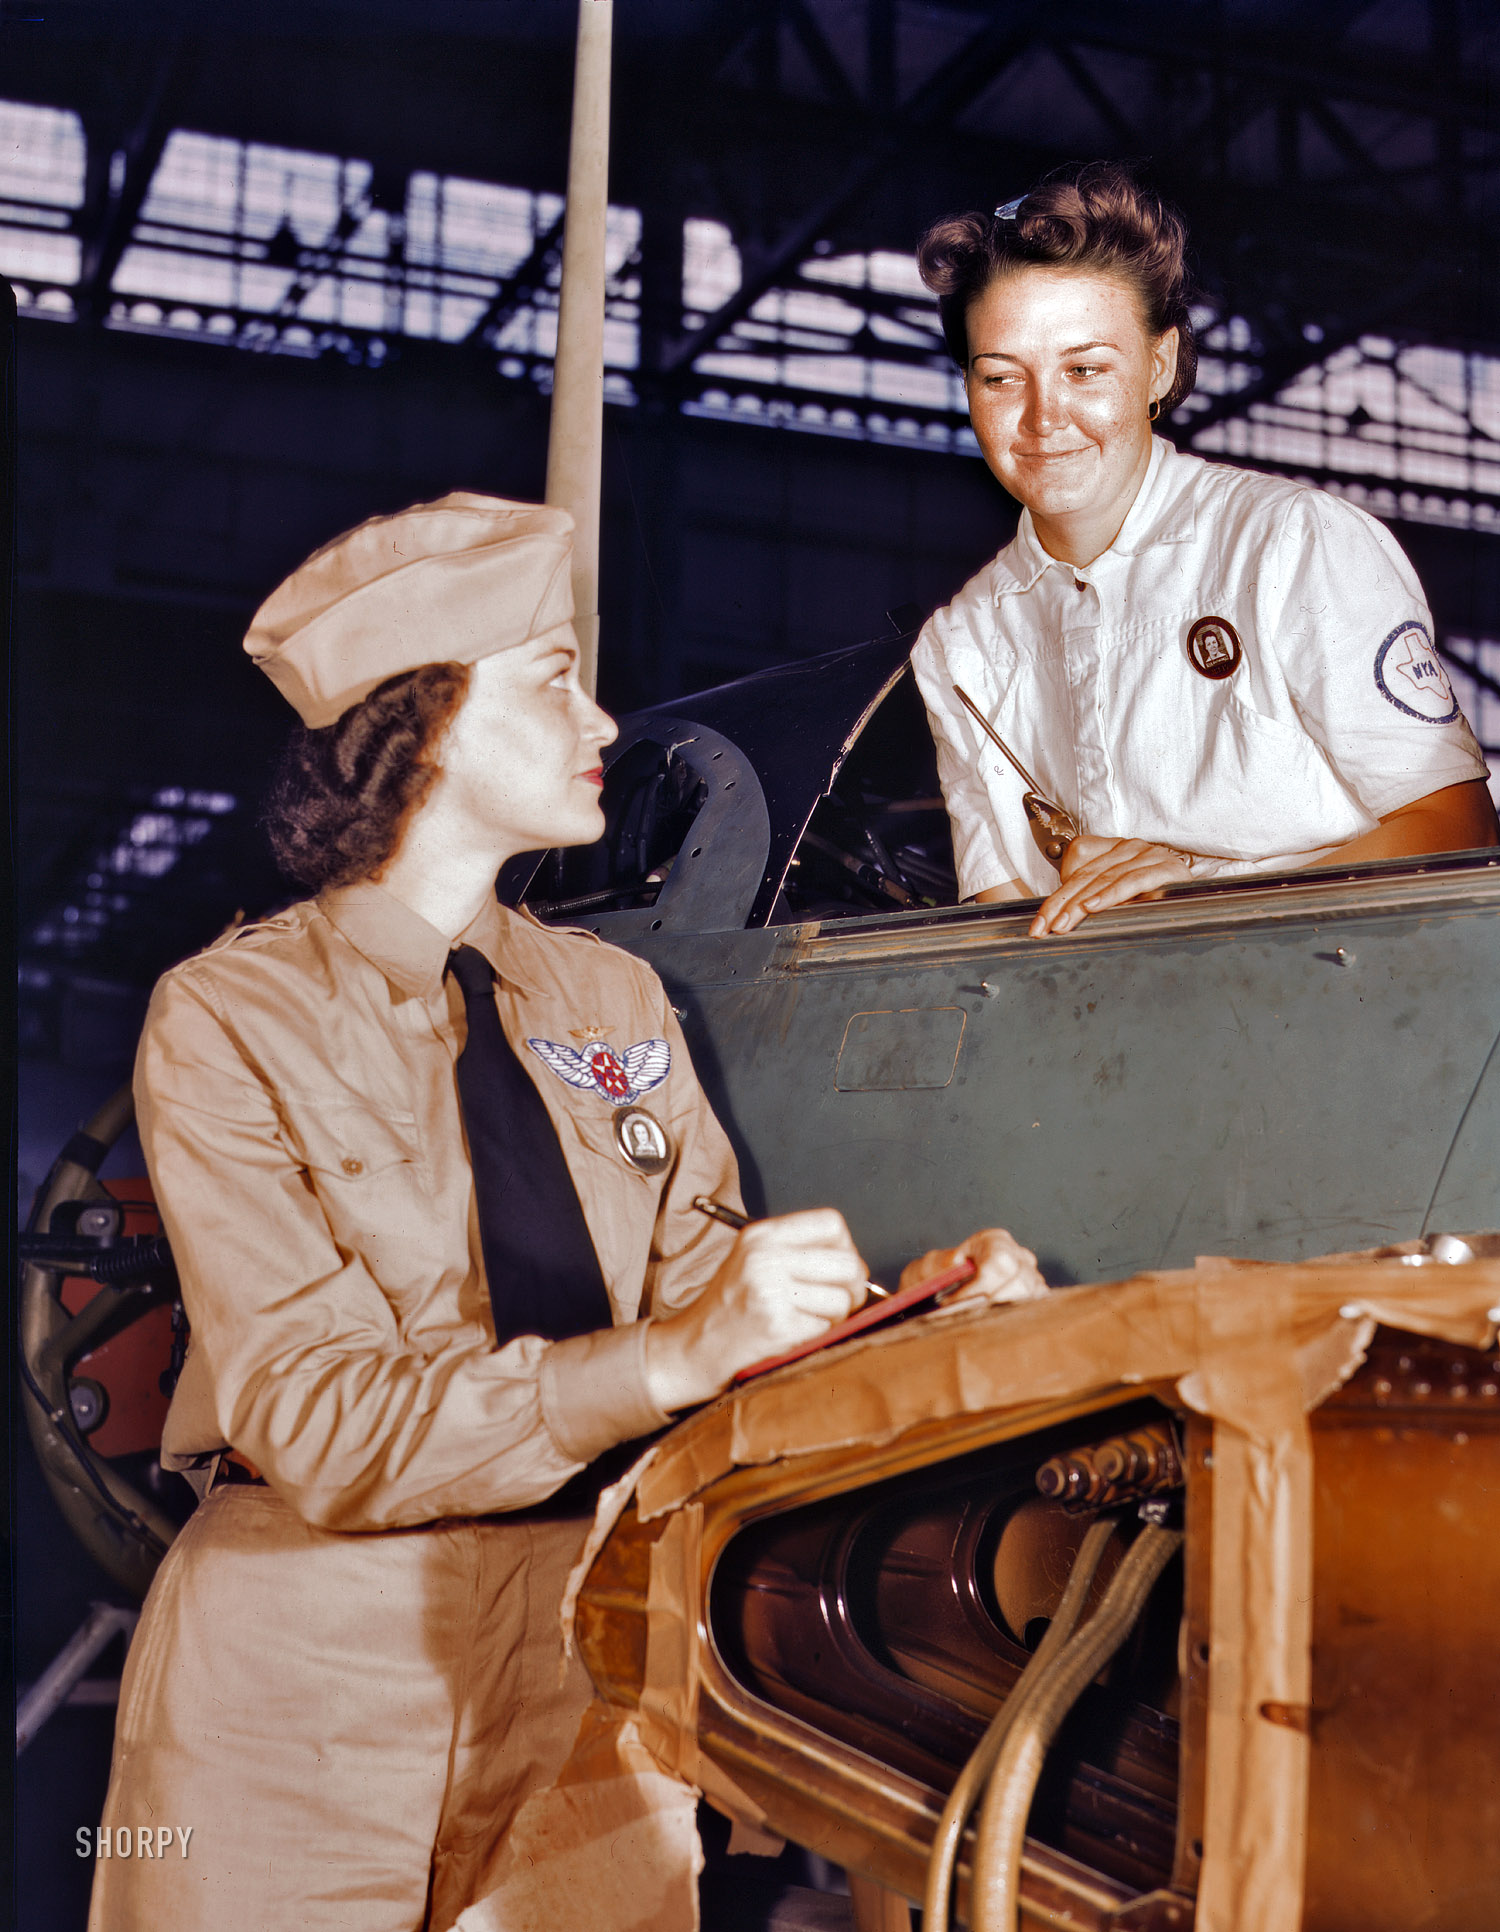 August 1942. "Formerly a sociology major at the University of Southern California, Mrs. Eloise J. Ellis (left) now "keeps 'em flyin'" at the Naval Air Base, Corpus Christi, Texas. She is a supervisor under civil service in the Assembly and Repair Department. It is her job to maintain morale among the women by helping them solve housing and other personal problems. With her is Jo Ann Whittington, an NYA trainee at the plant."  Large format Kodachrome transparency by Howard Hollem for the Office of War Information. View full size.